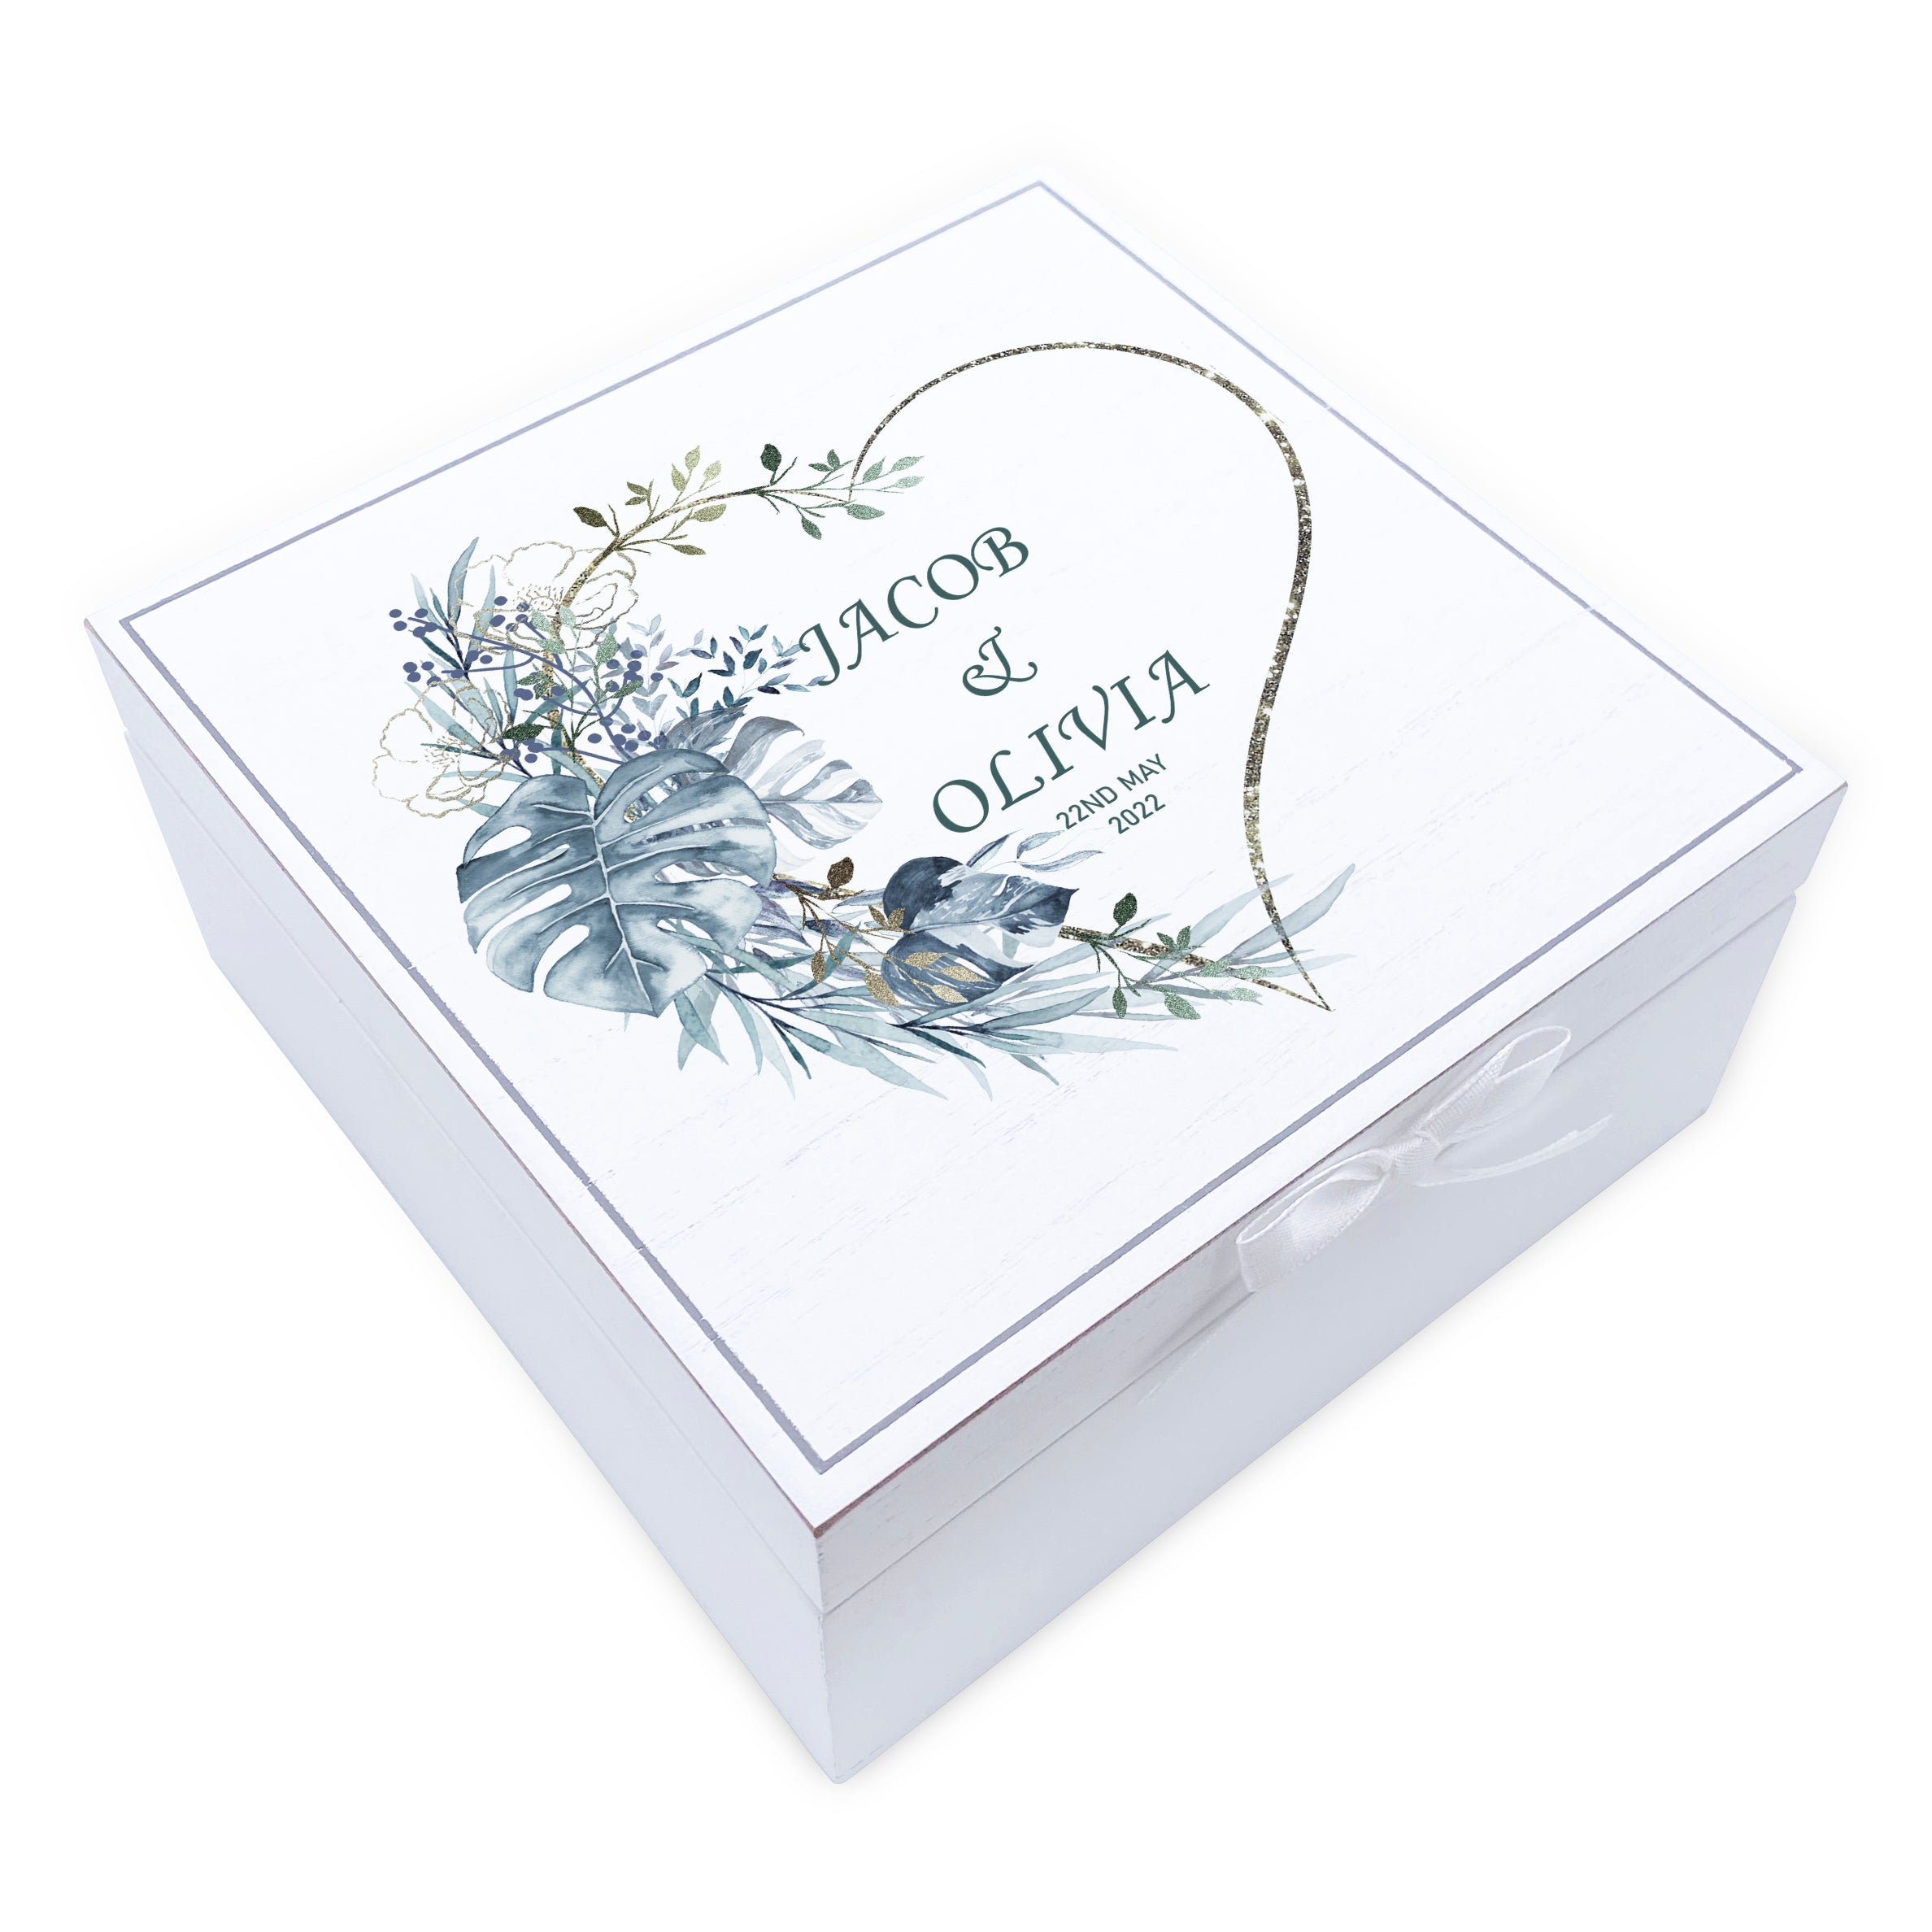 Personalised Wedding Day Vintage Wooden Keepsake Box Gift With Blue Palms Heart Print